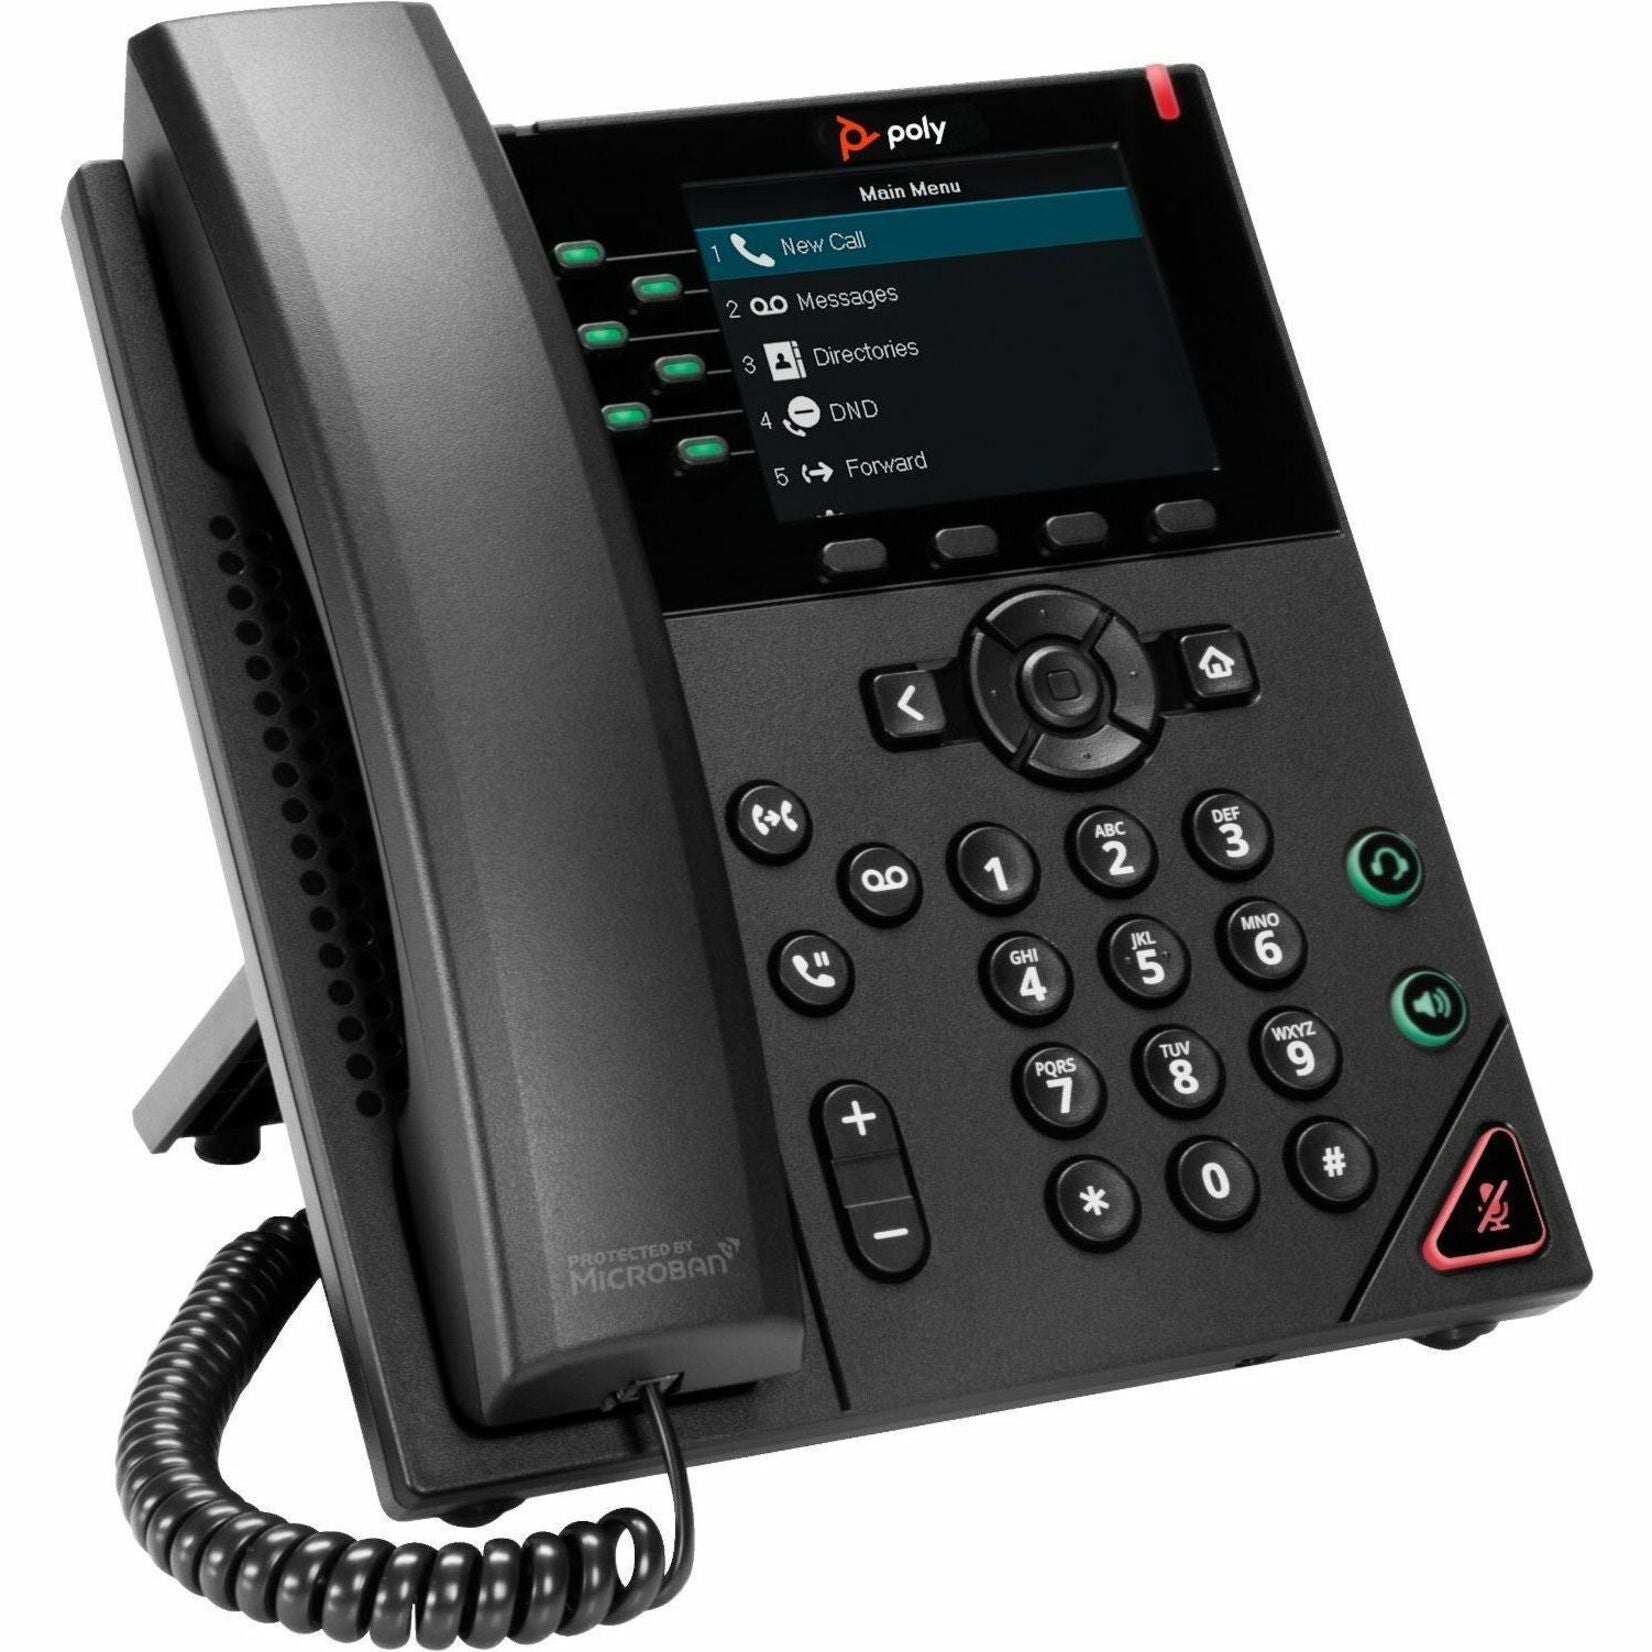 Poly 89B68AA VVX 350 IP Phone, 6-Line, PoE-enabled, Black, TAA Compliant